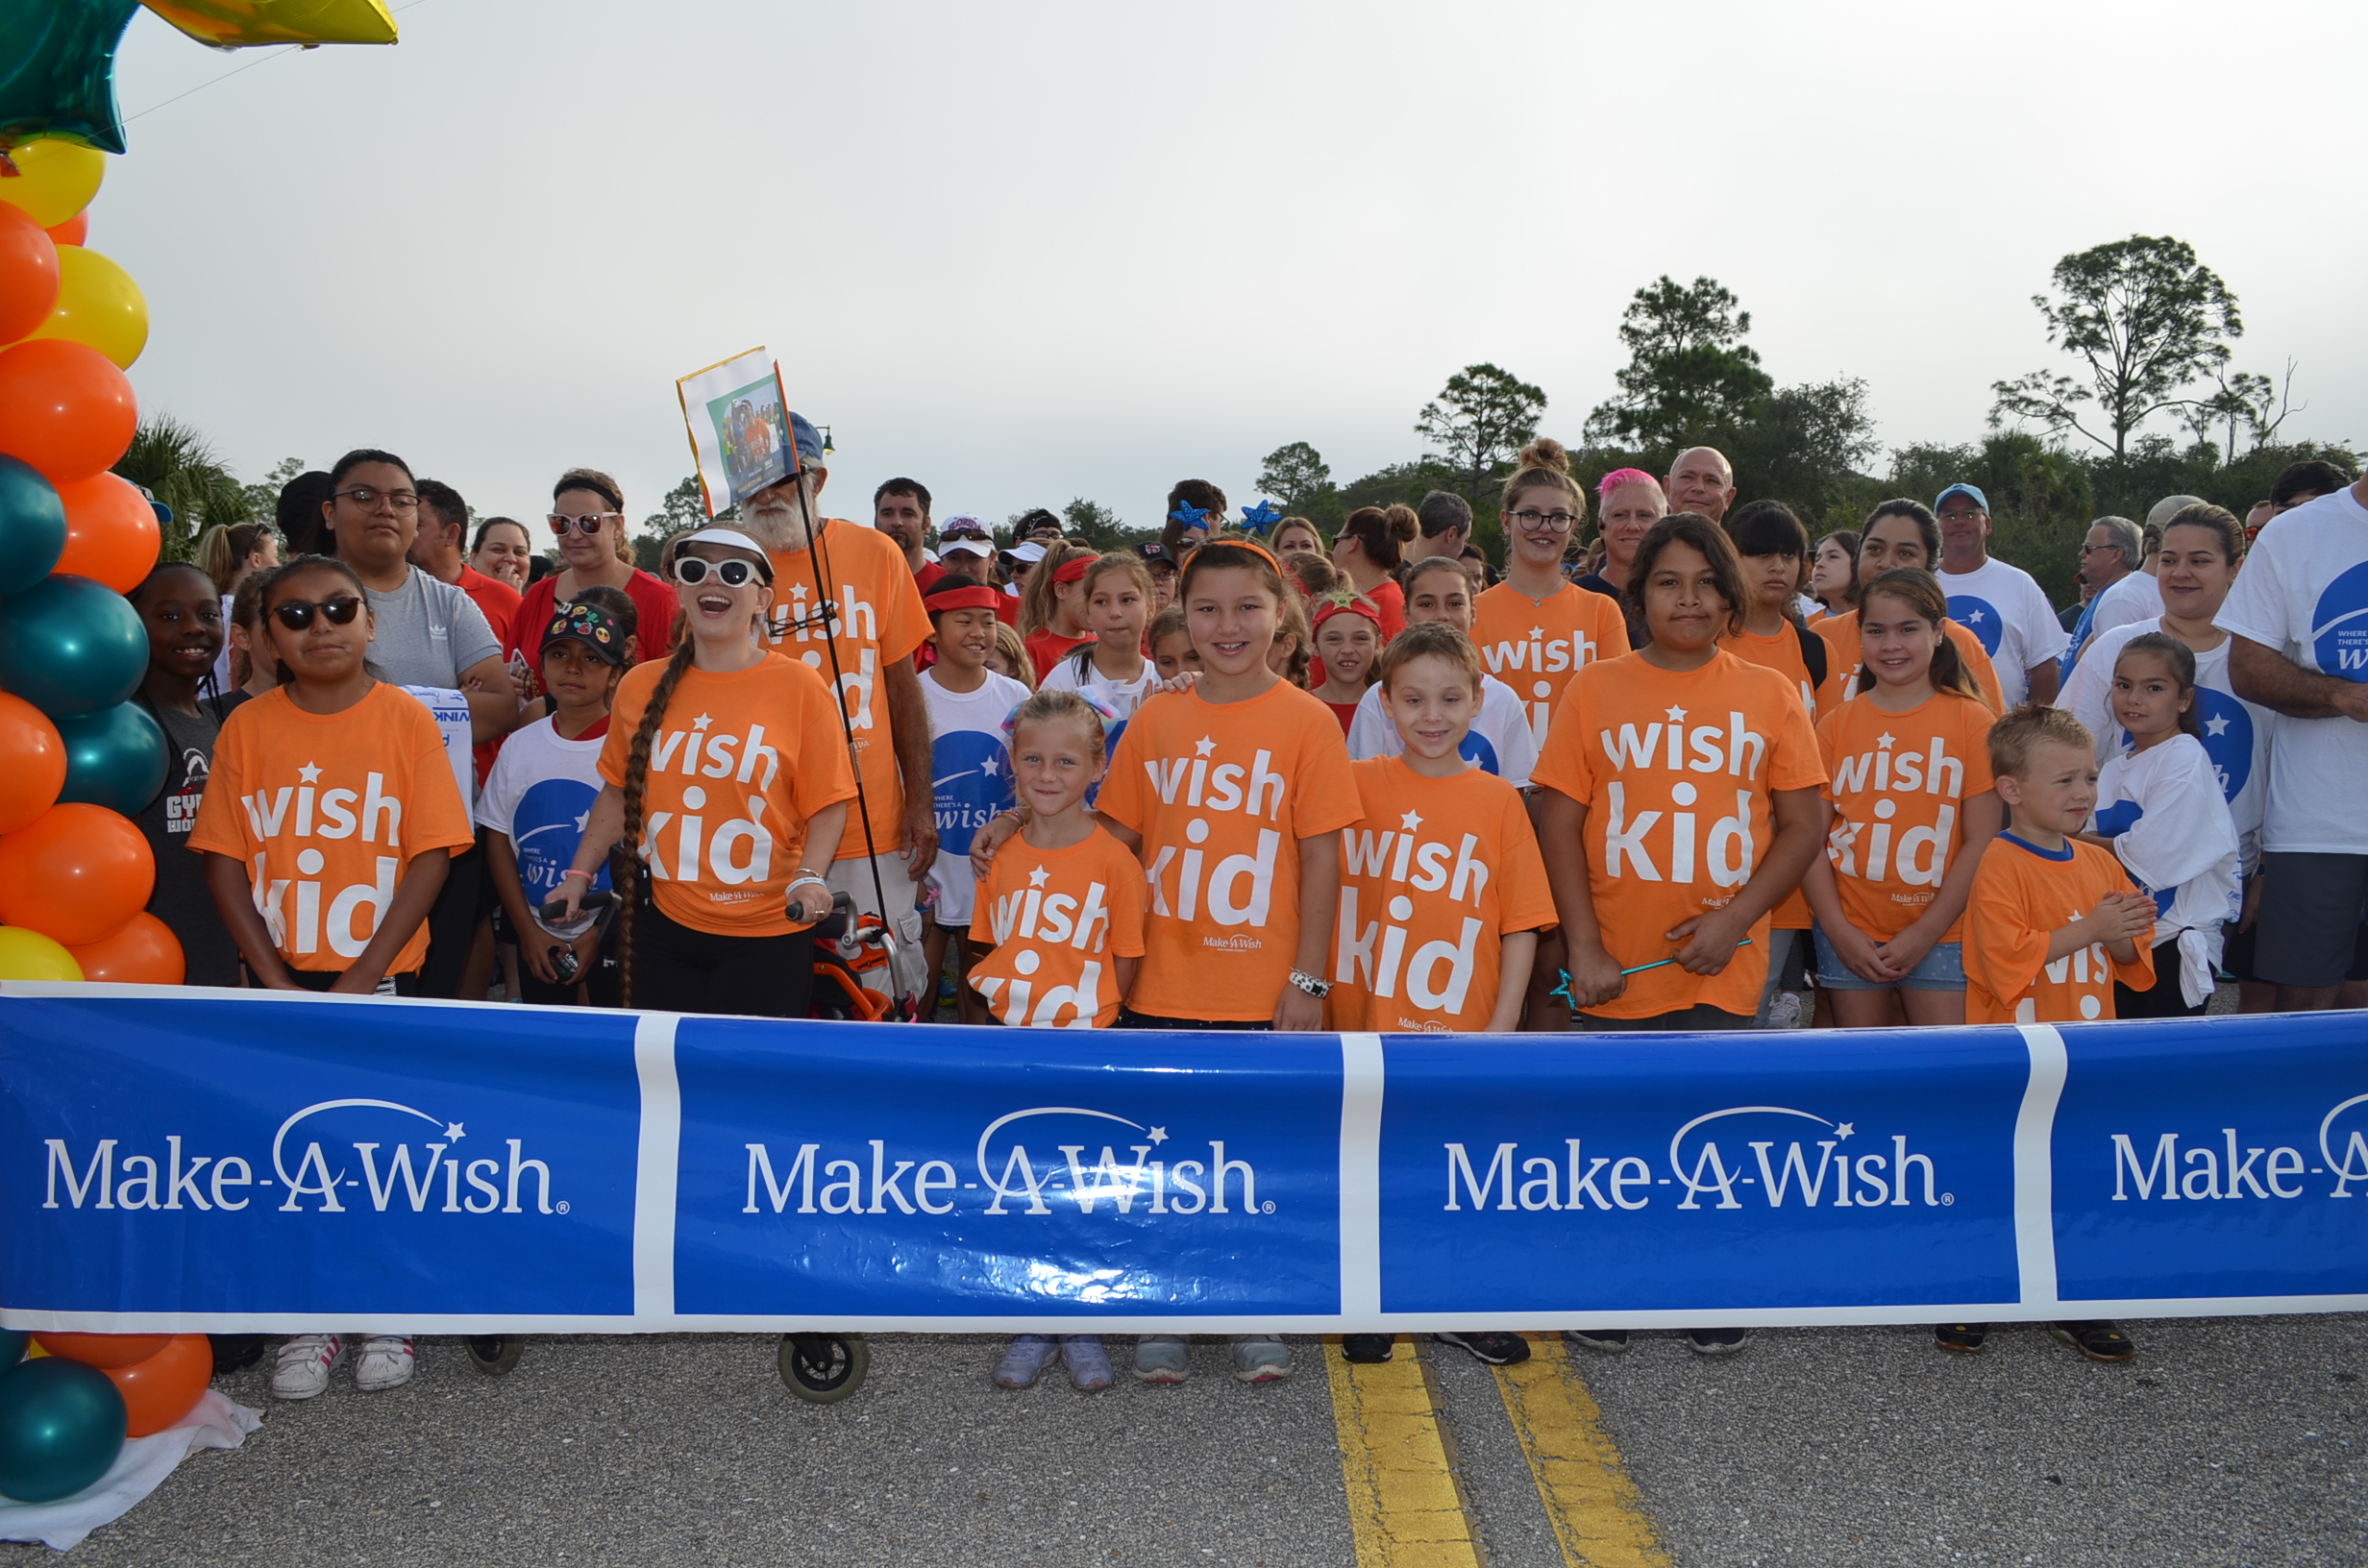 Walk For Wishes® - Collier/Lee - Make-A-Wish® Southern Florida, Inc.